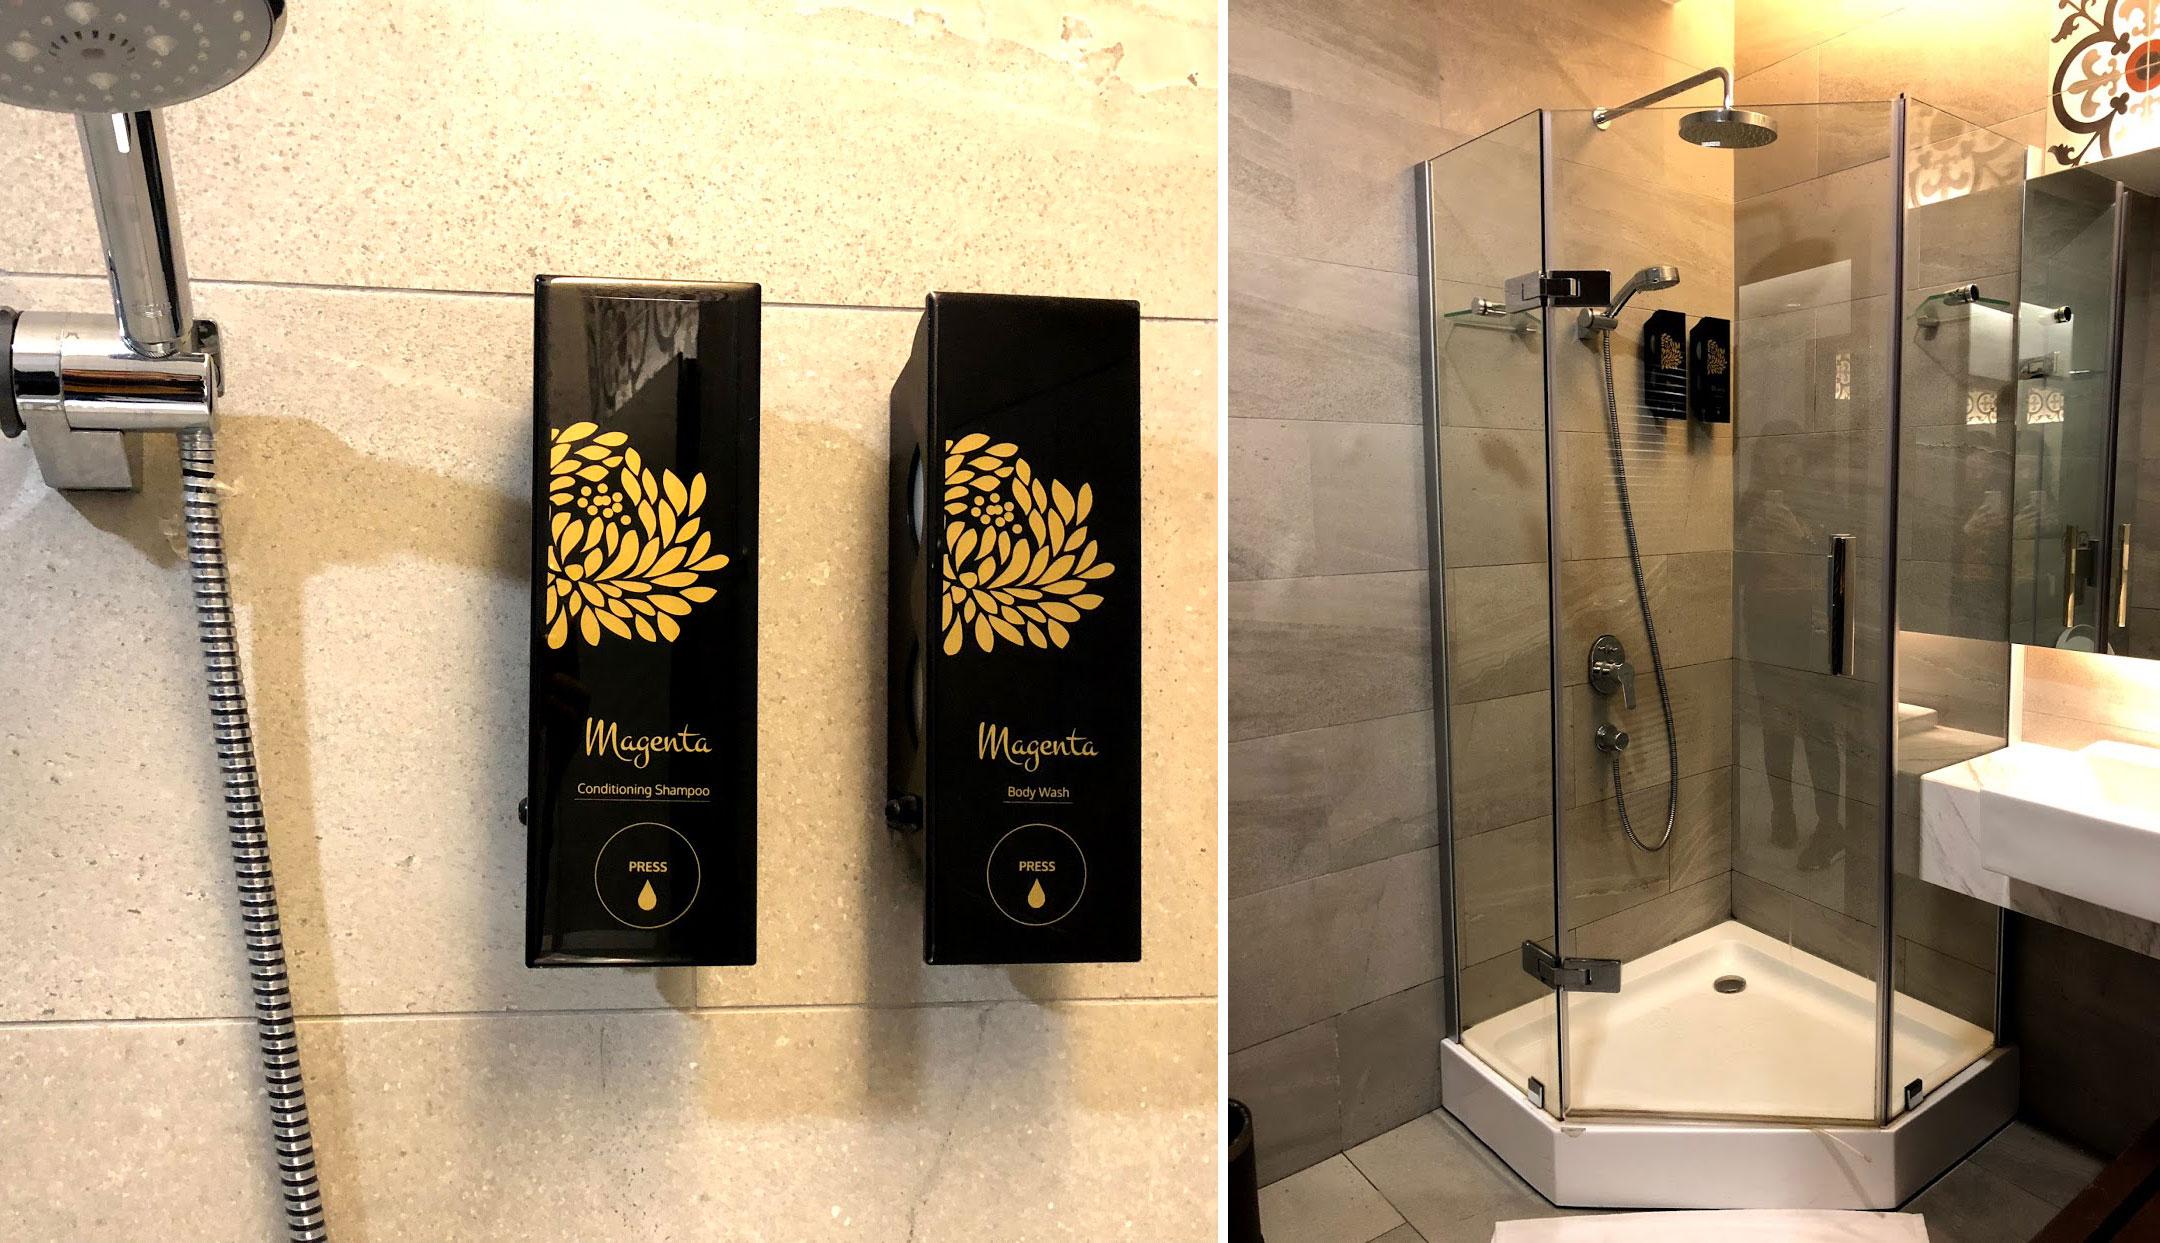 Malaysia Airlines Satellite Golden Lounge Kuala Lumpur toiletries and shower